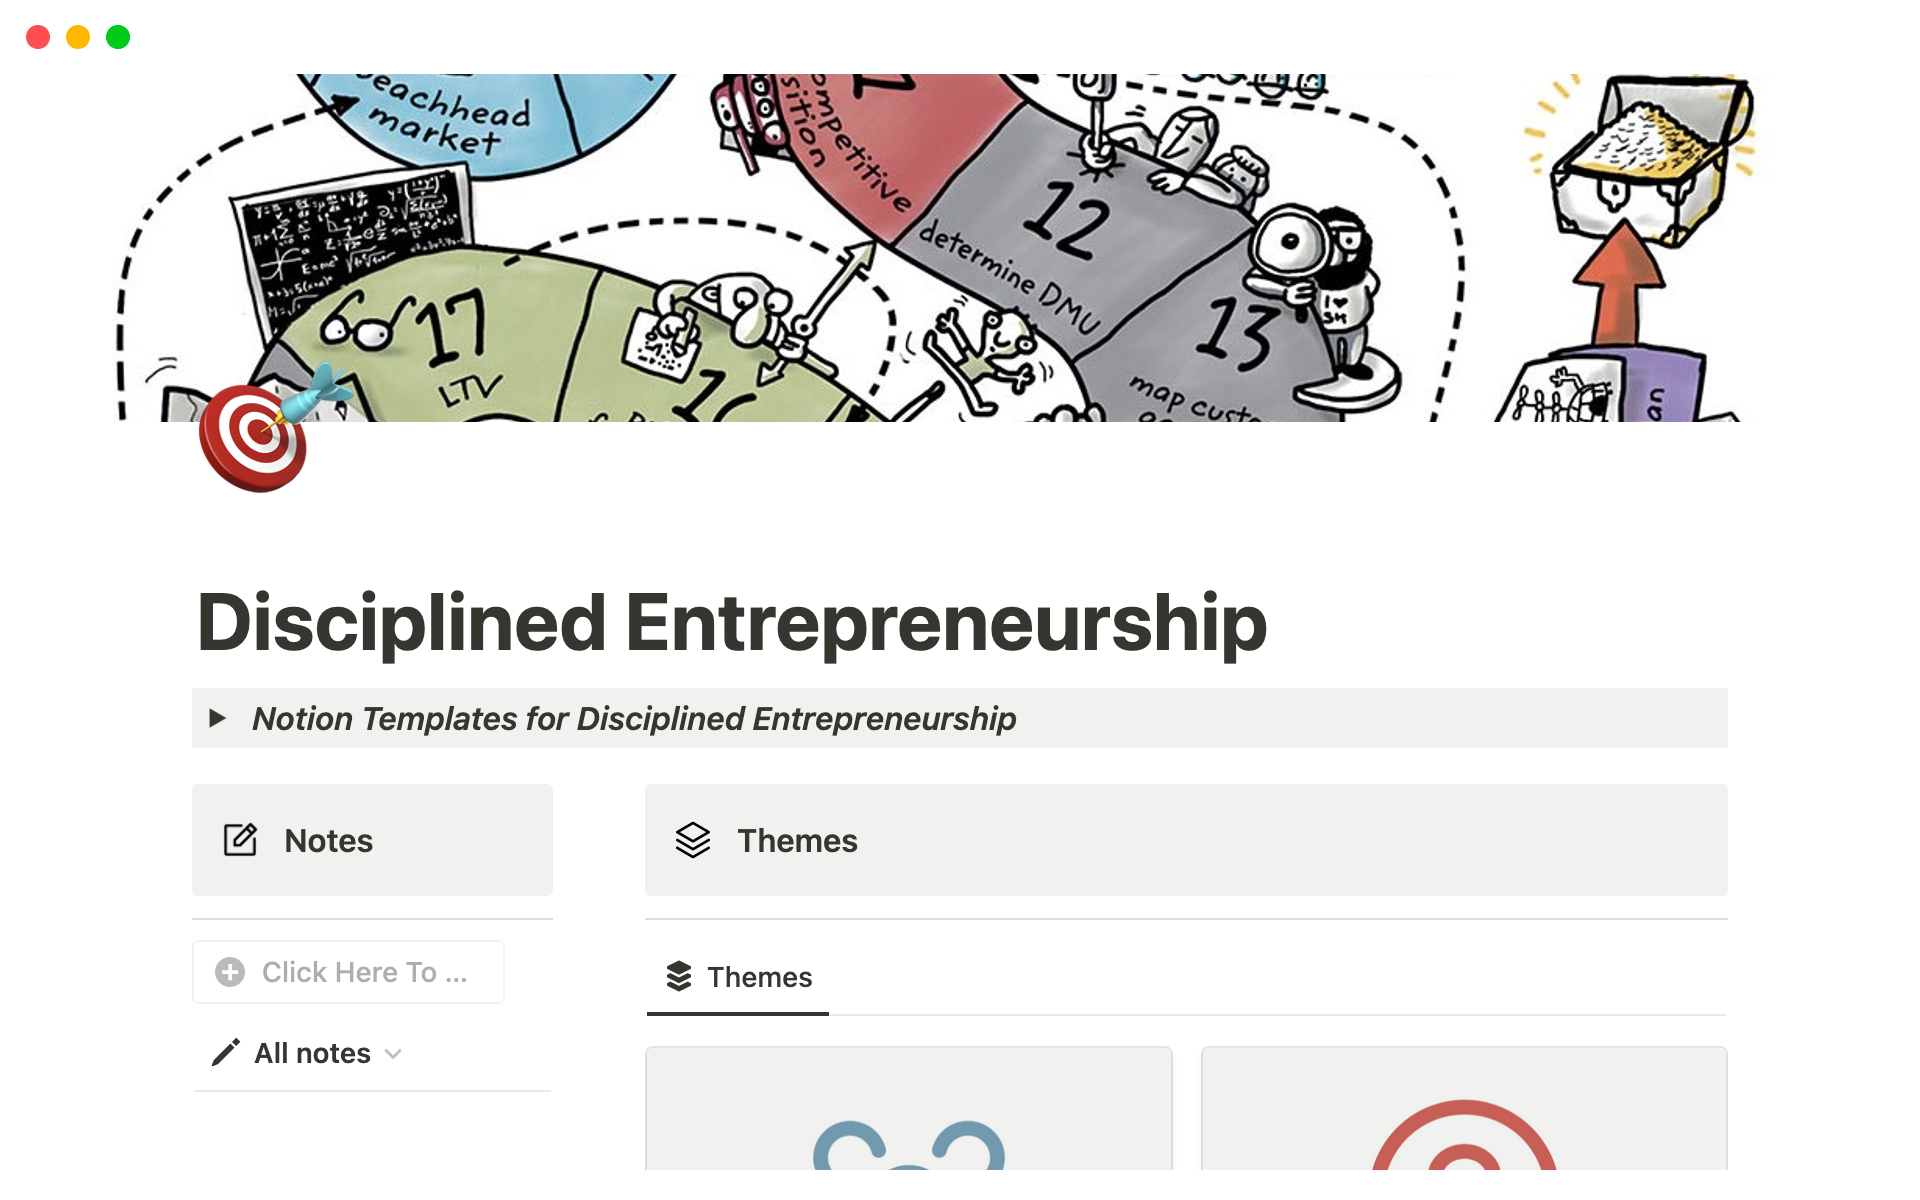 Transform your entrepreneurial ideas into a thriving business with Notion templates designed for Disciplined Entrepreneurship by MIT's Bill Aulet.